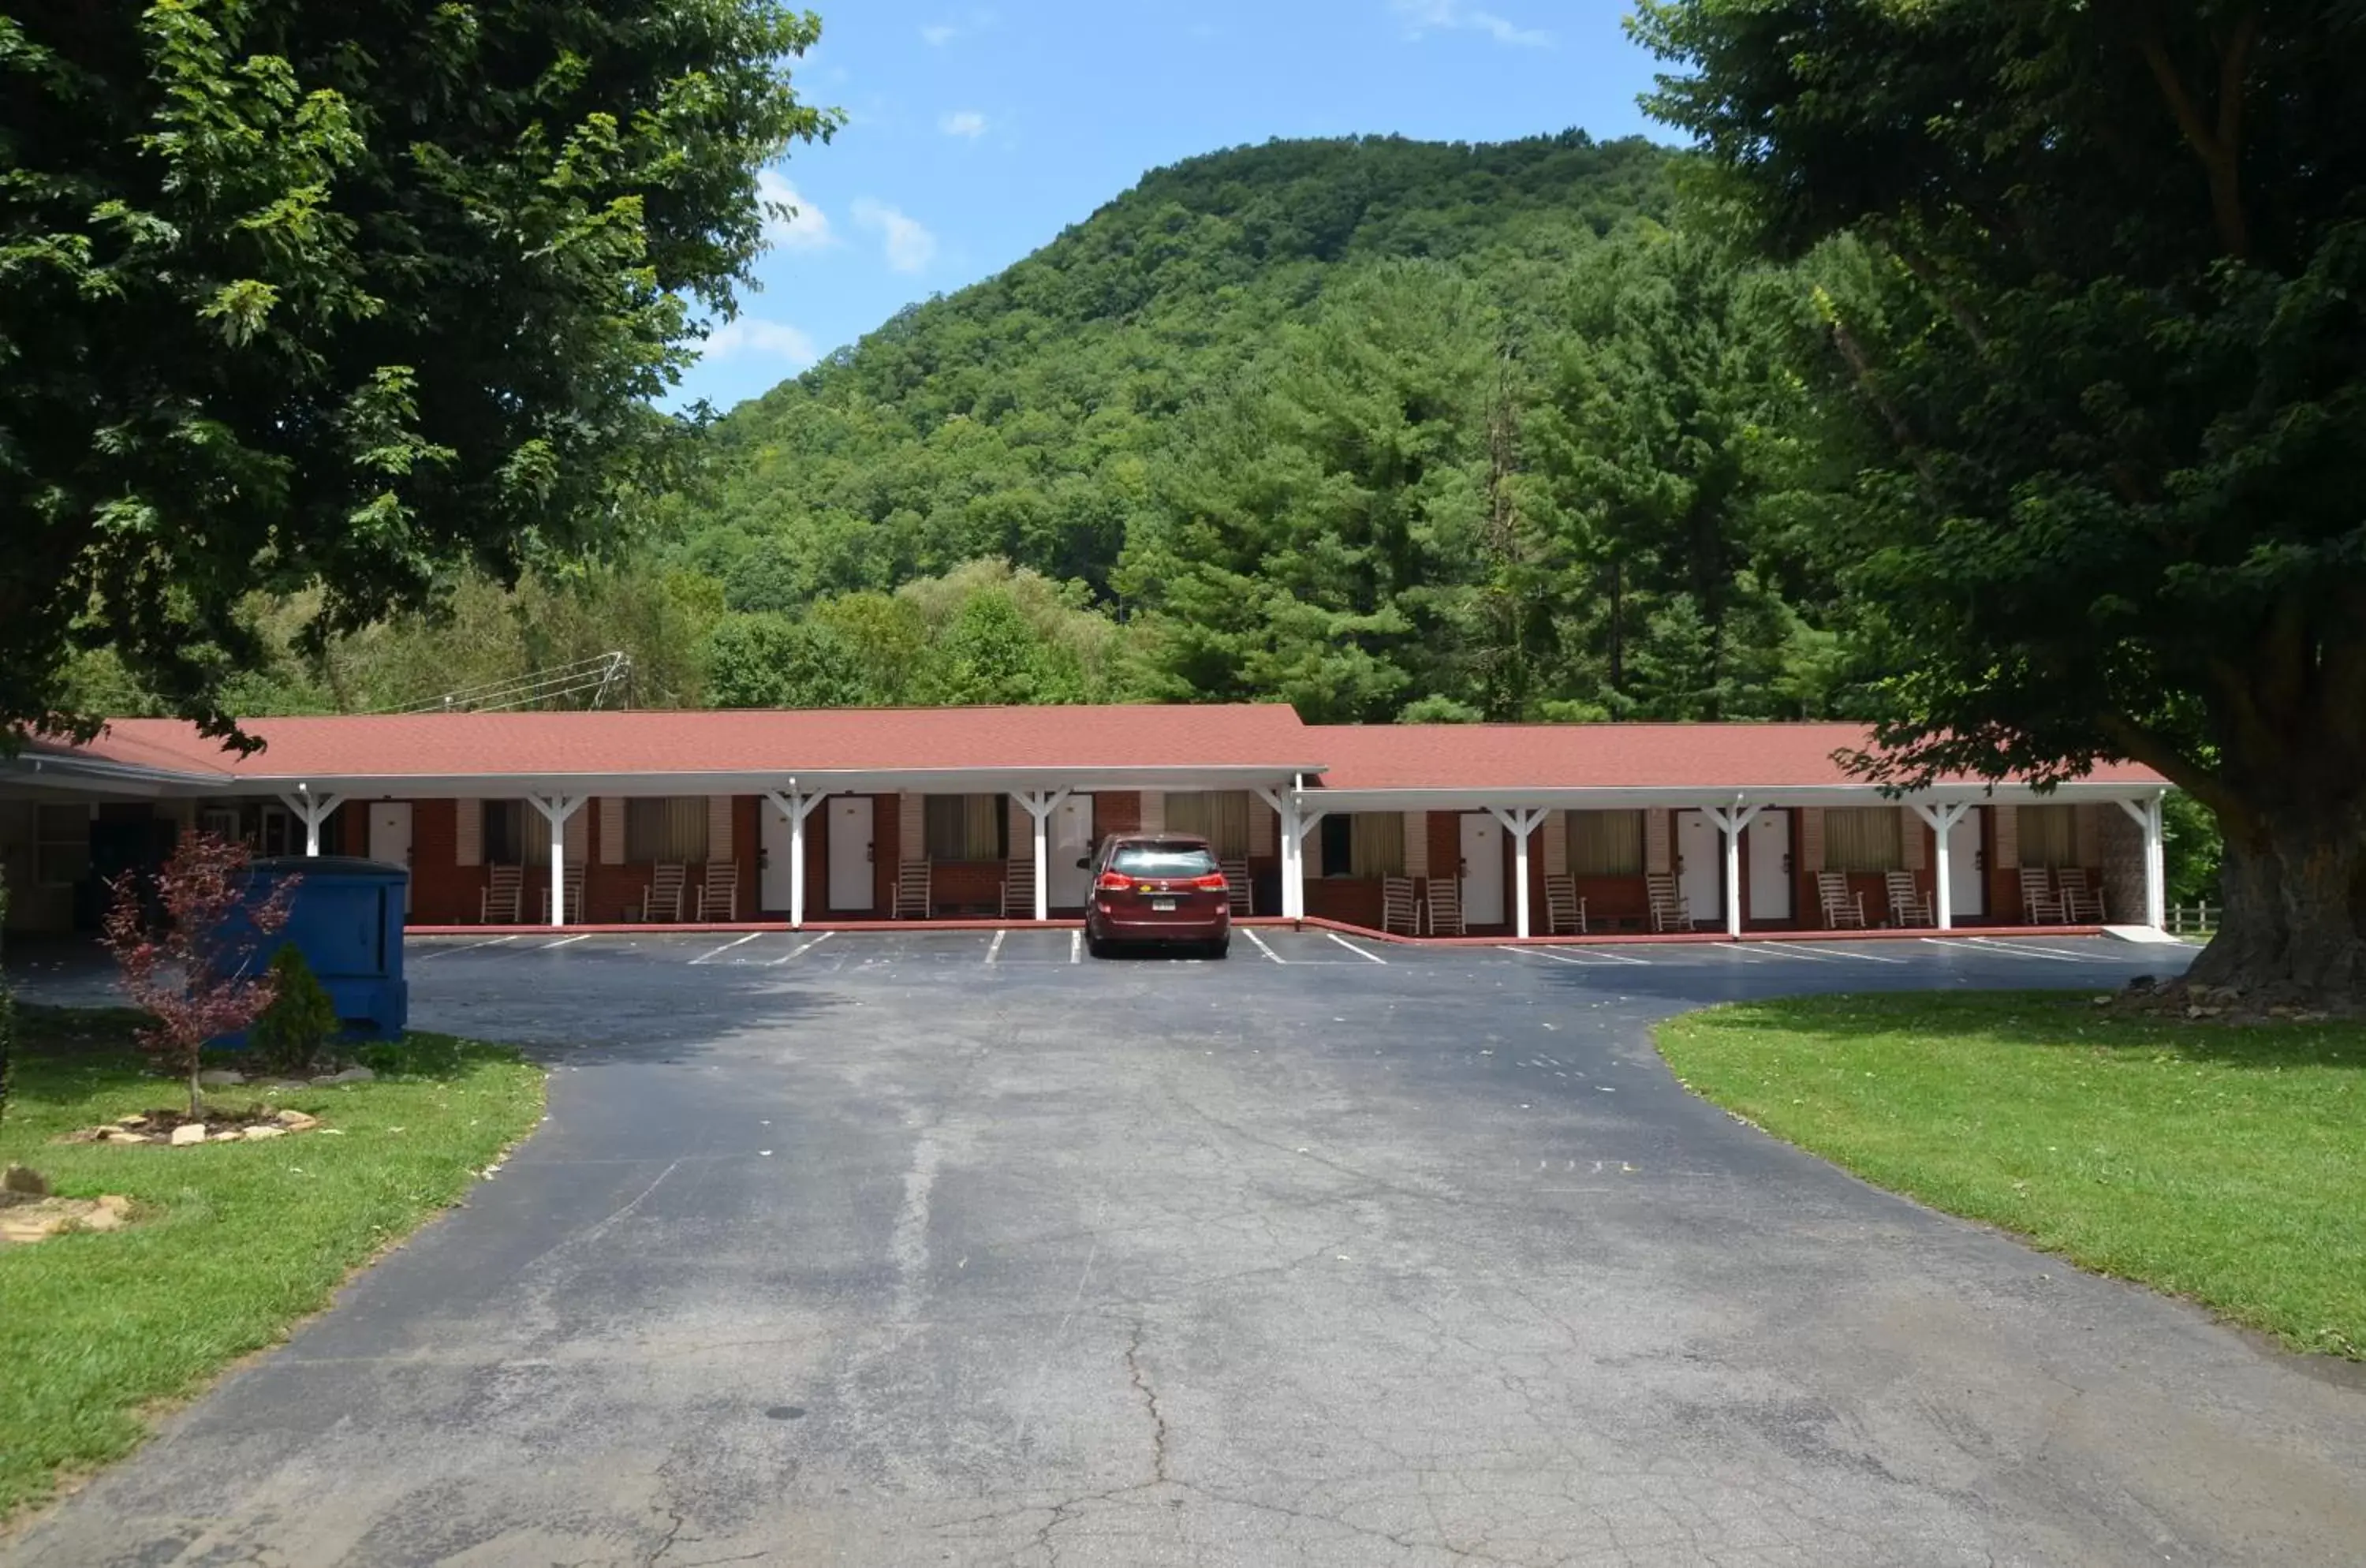 Parking, Property Building in Travelowes Motel - Maggie Valley